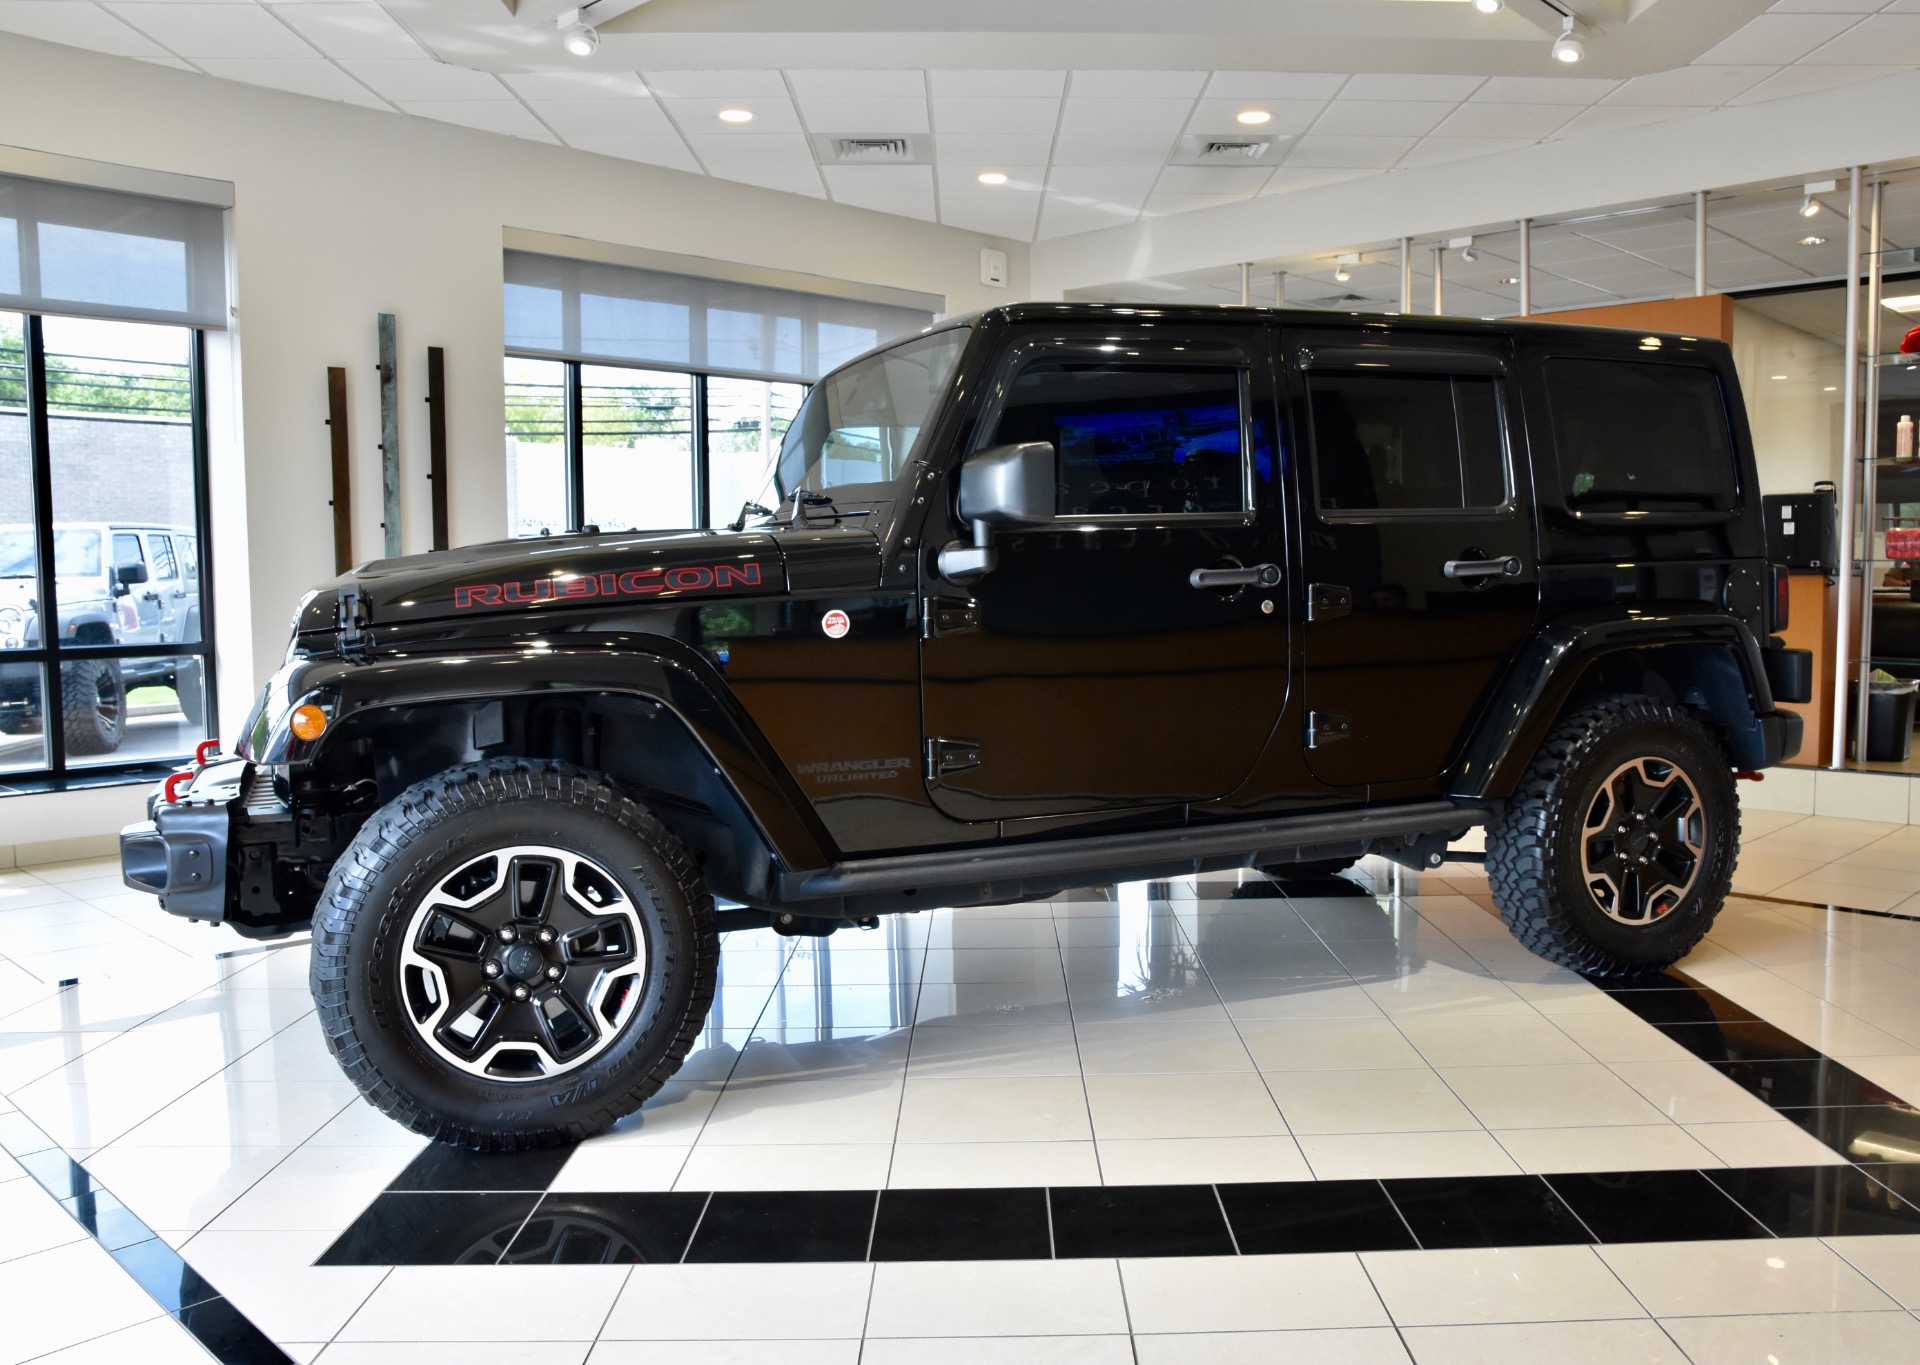 Used 2016 Jeep Wrangler Unlimited Rubicon Hard Rock For Sale (Sold)